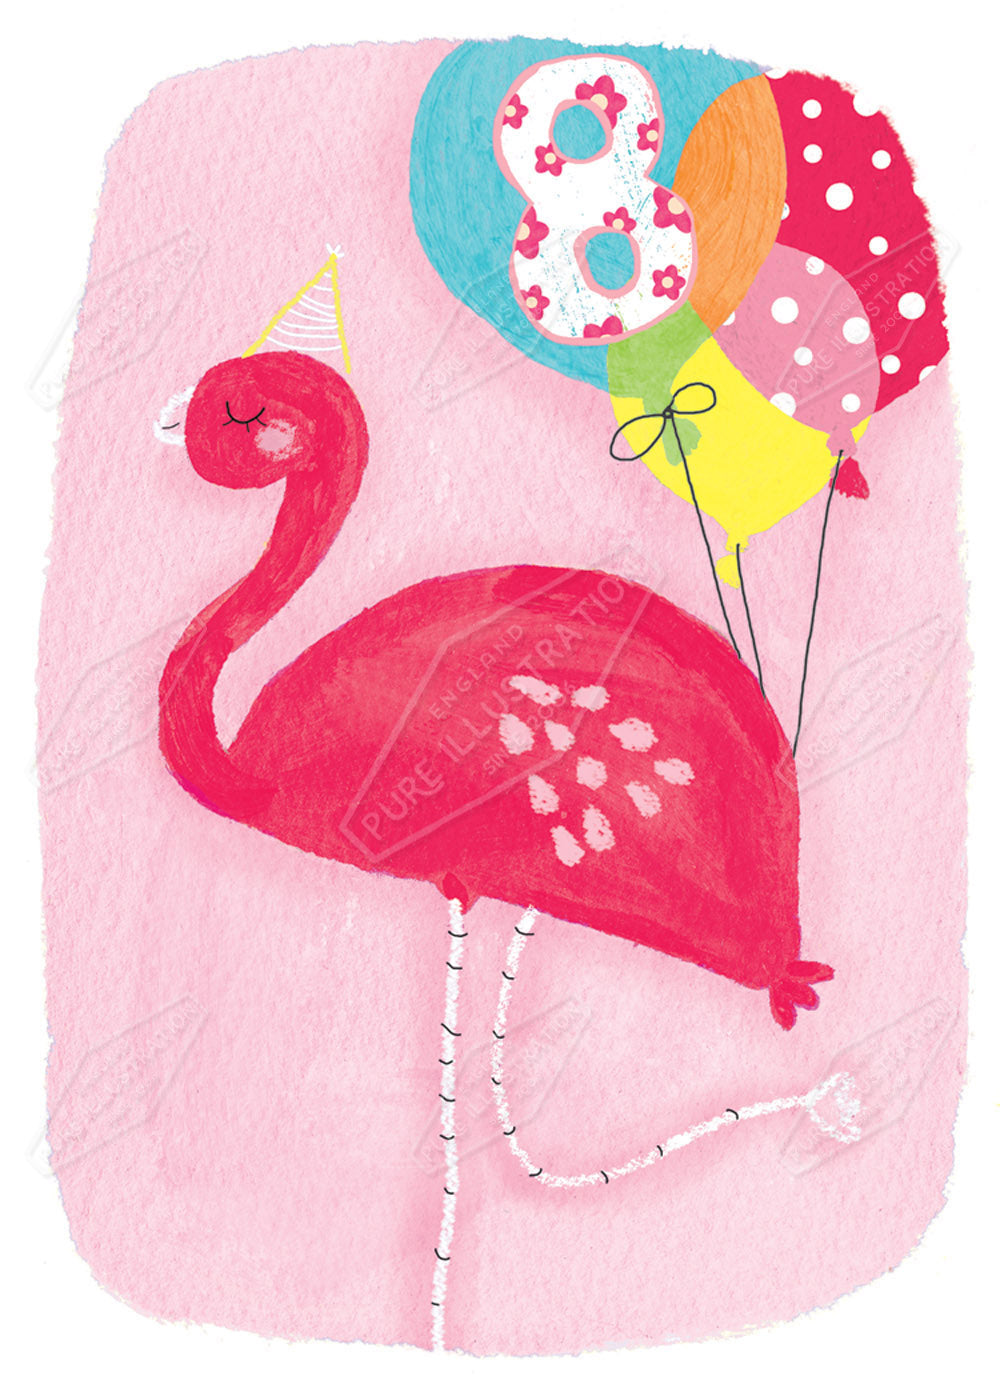 Birthday Flamingo Age Card Greeting Card Design by Cory Reid for Pure art Licensing Agency & Surface Design Studio